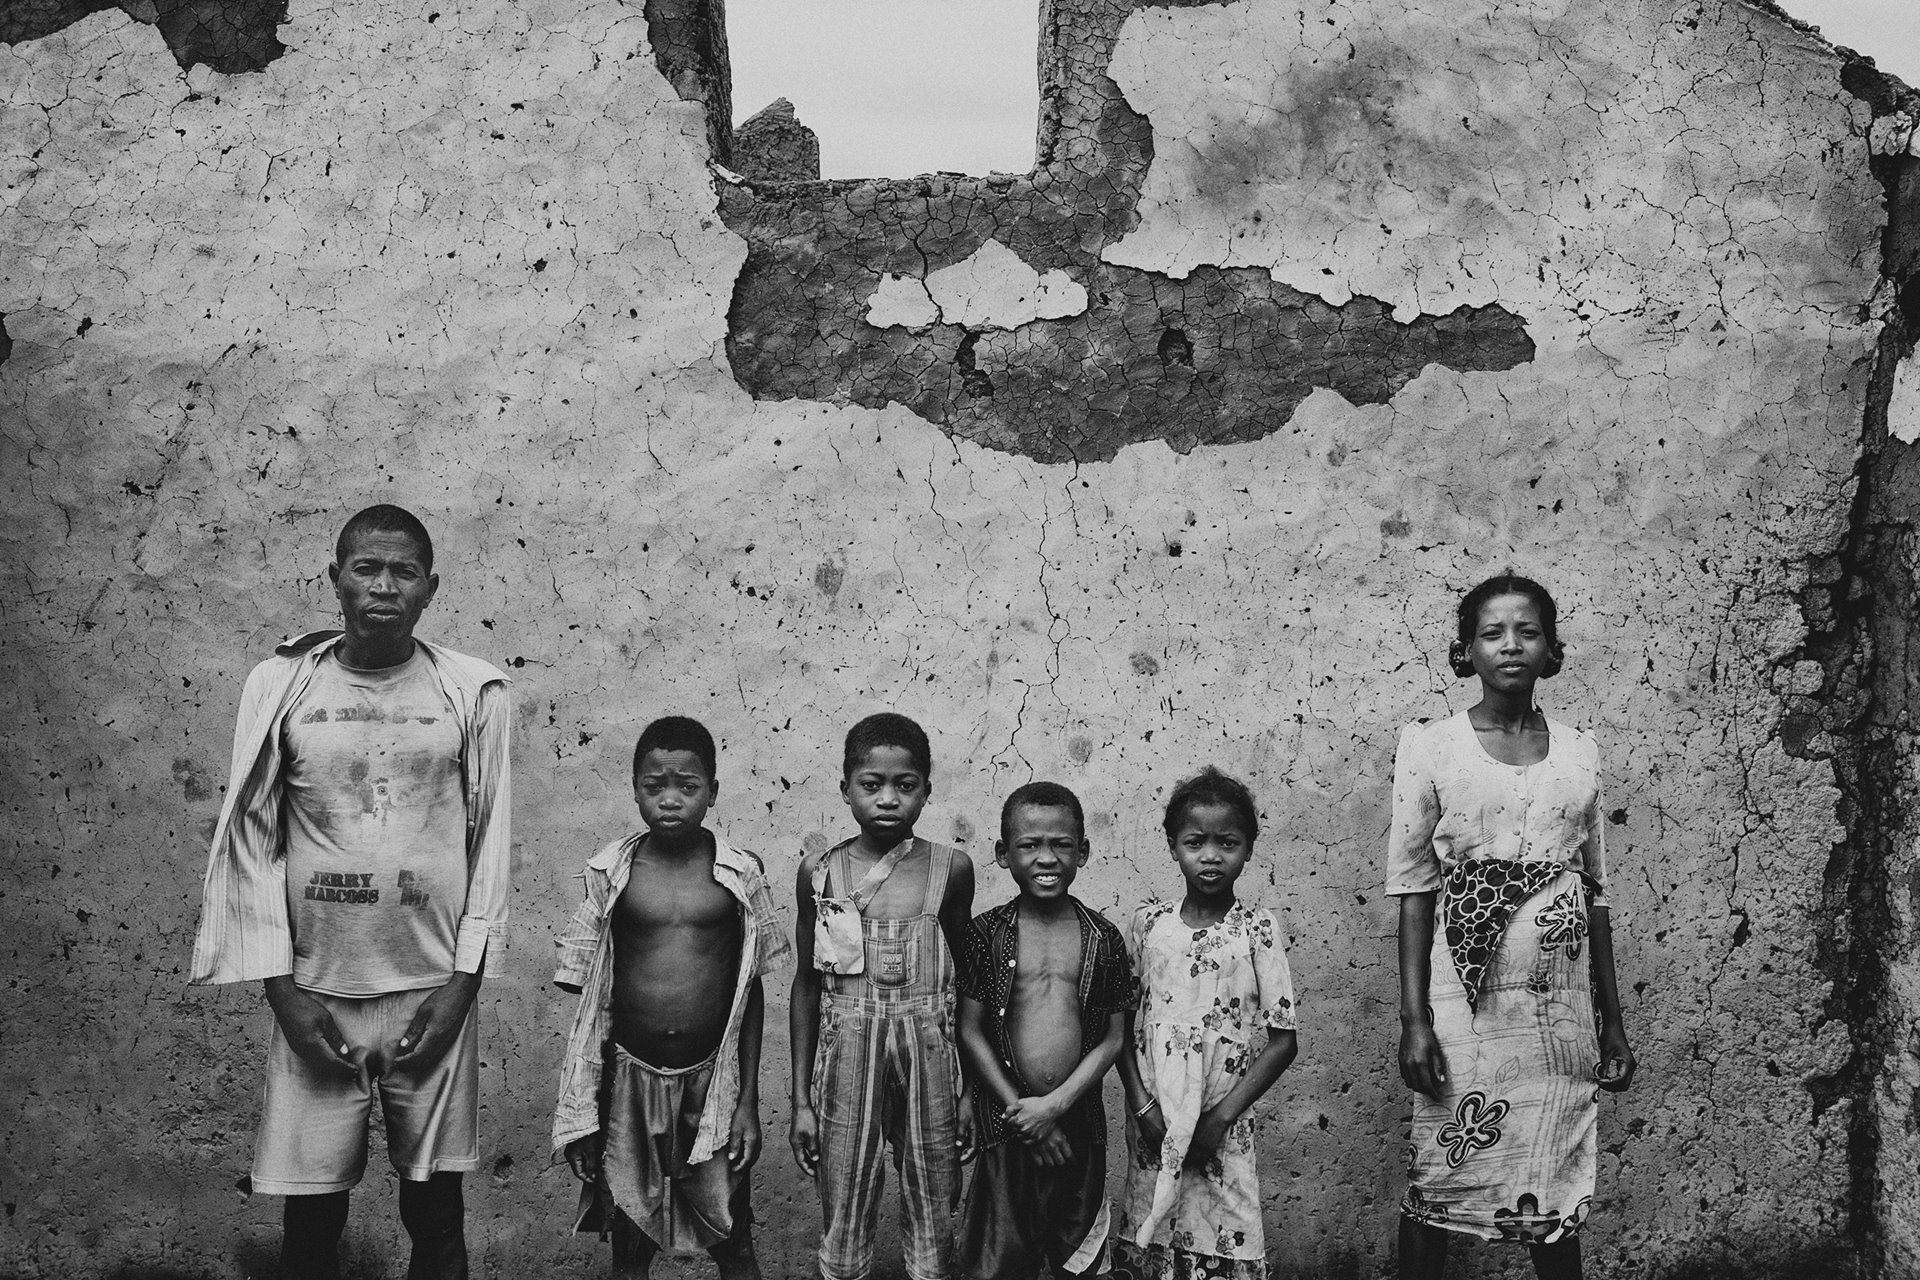 Jean-Baptiste stands with his wife and their children in the ruins of their home, in the village of Andorisa, Andriry, Madagascar. He says they were returning from the rice fields when they saw soldiers burning down their house, and that the soldiers stole a zebu to eat.